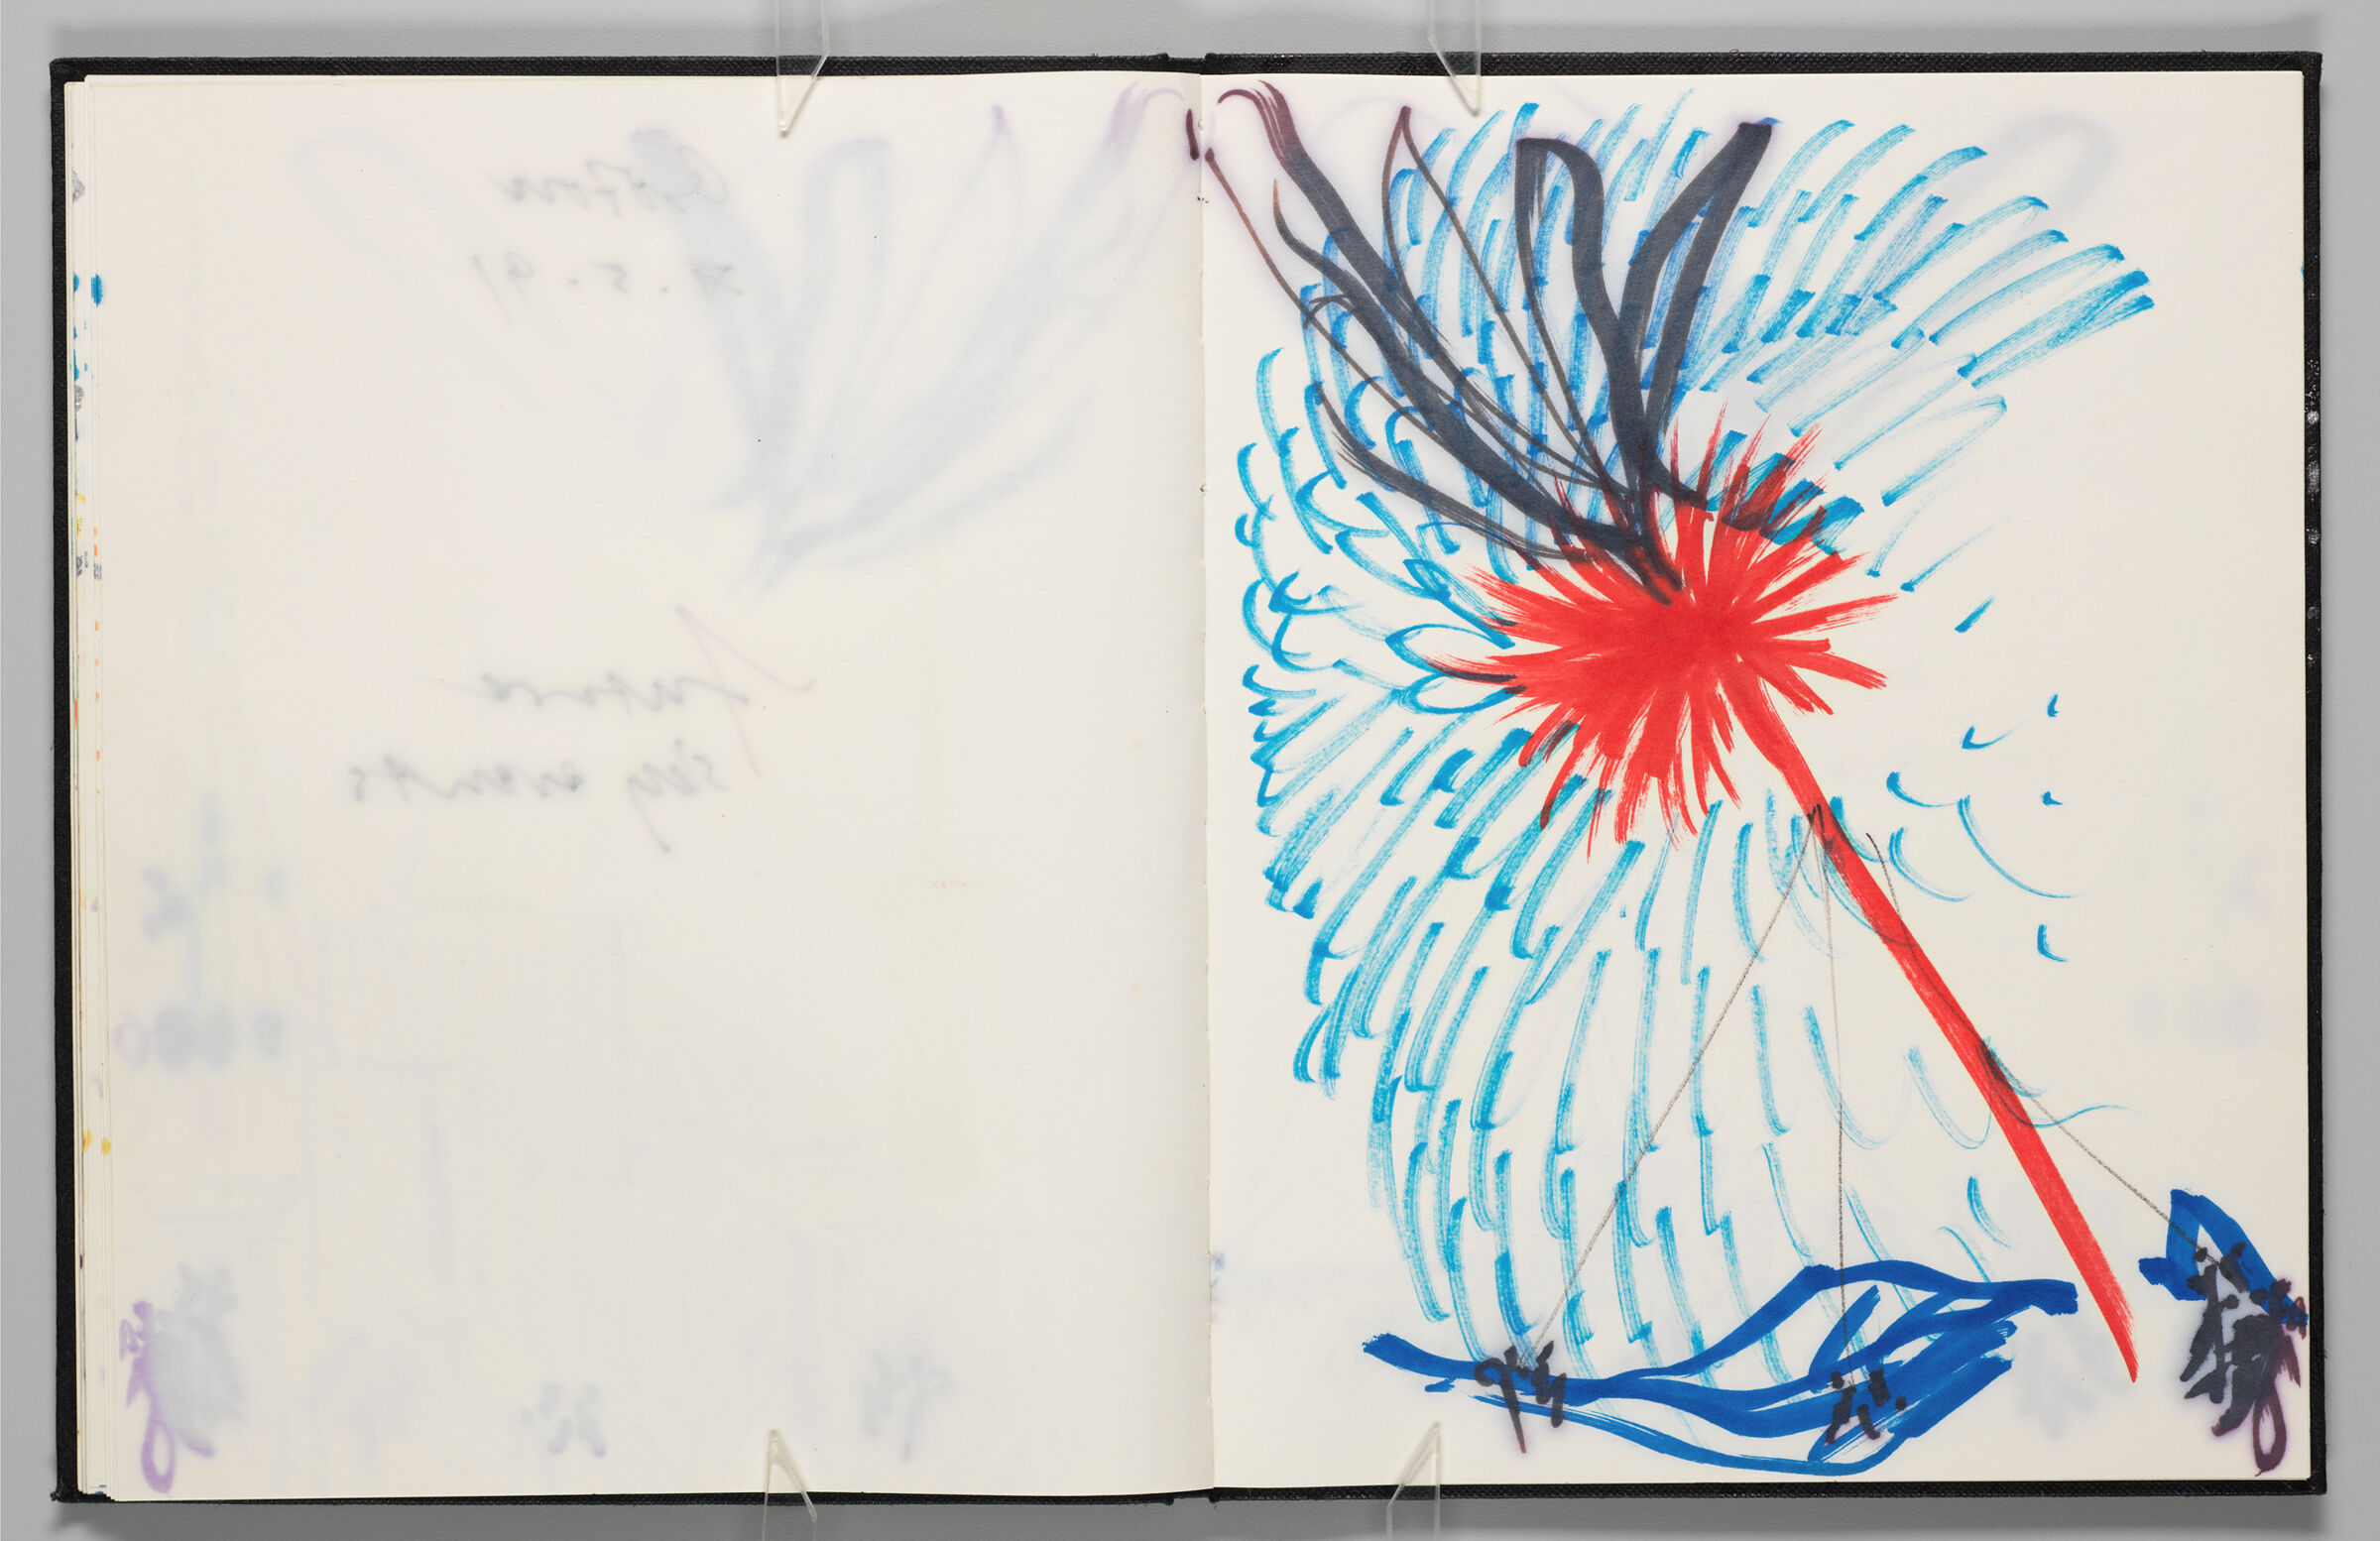 Untitled (Bleed-Through Of Previous Page And Color Transfer, Left Page); Untitled (